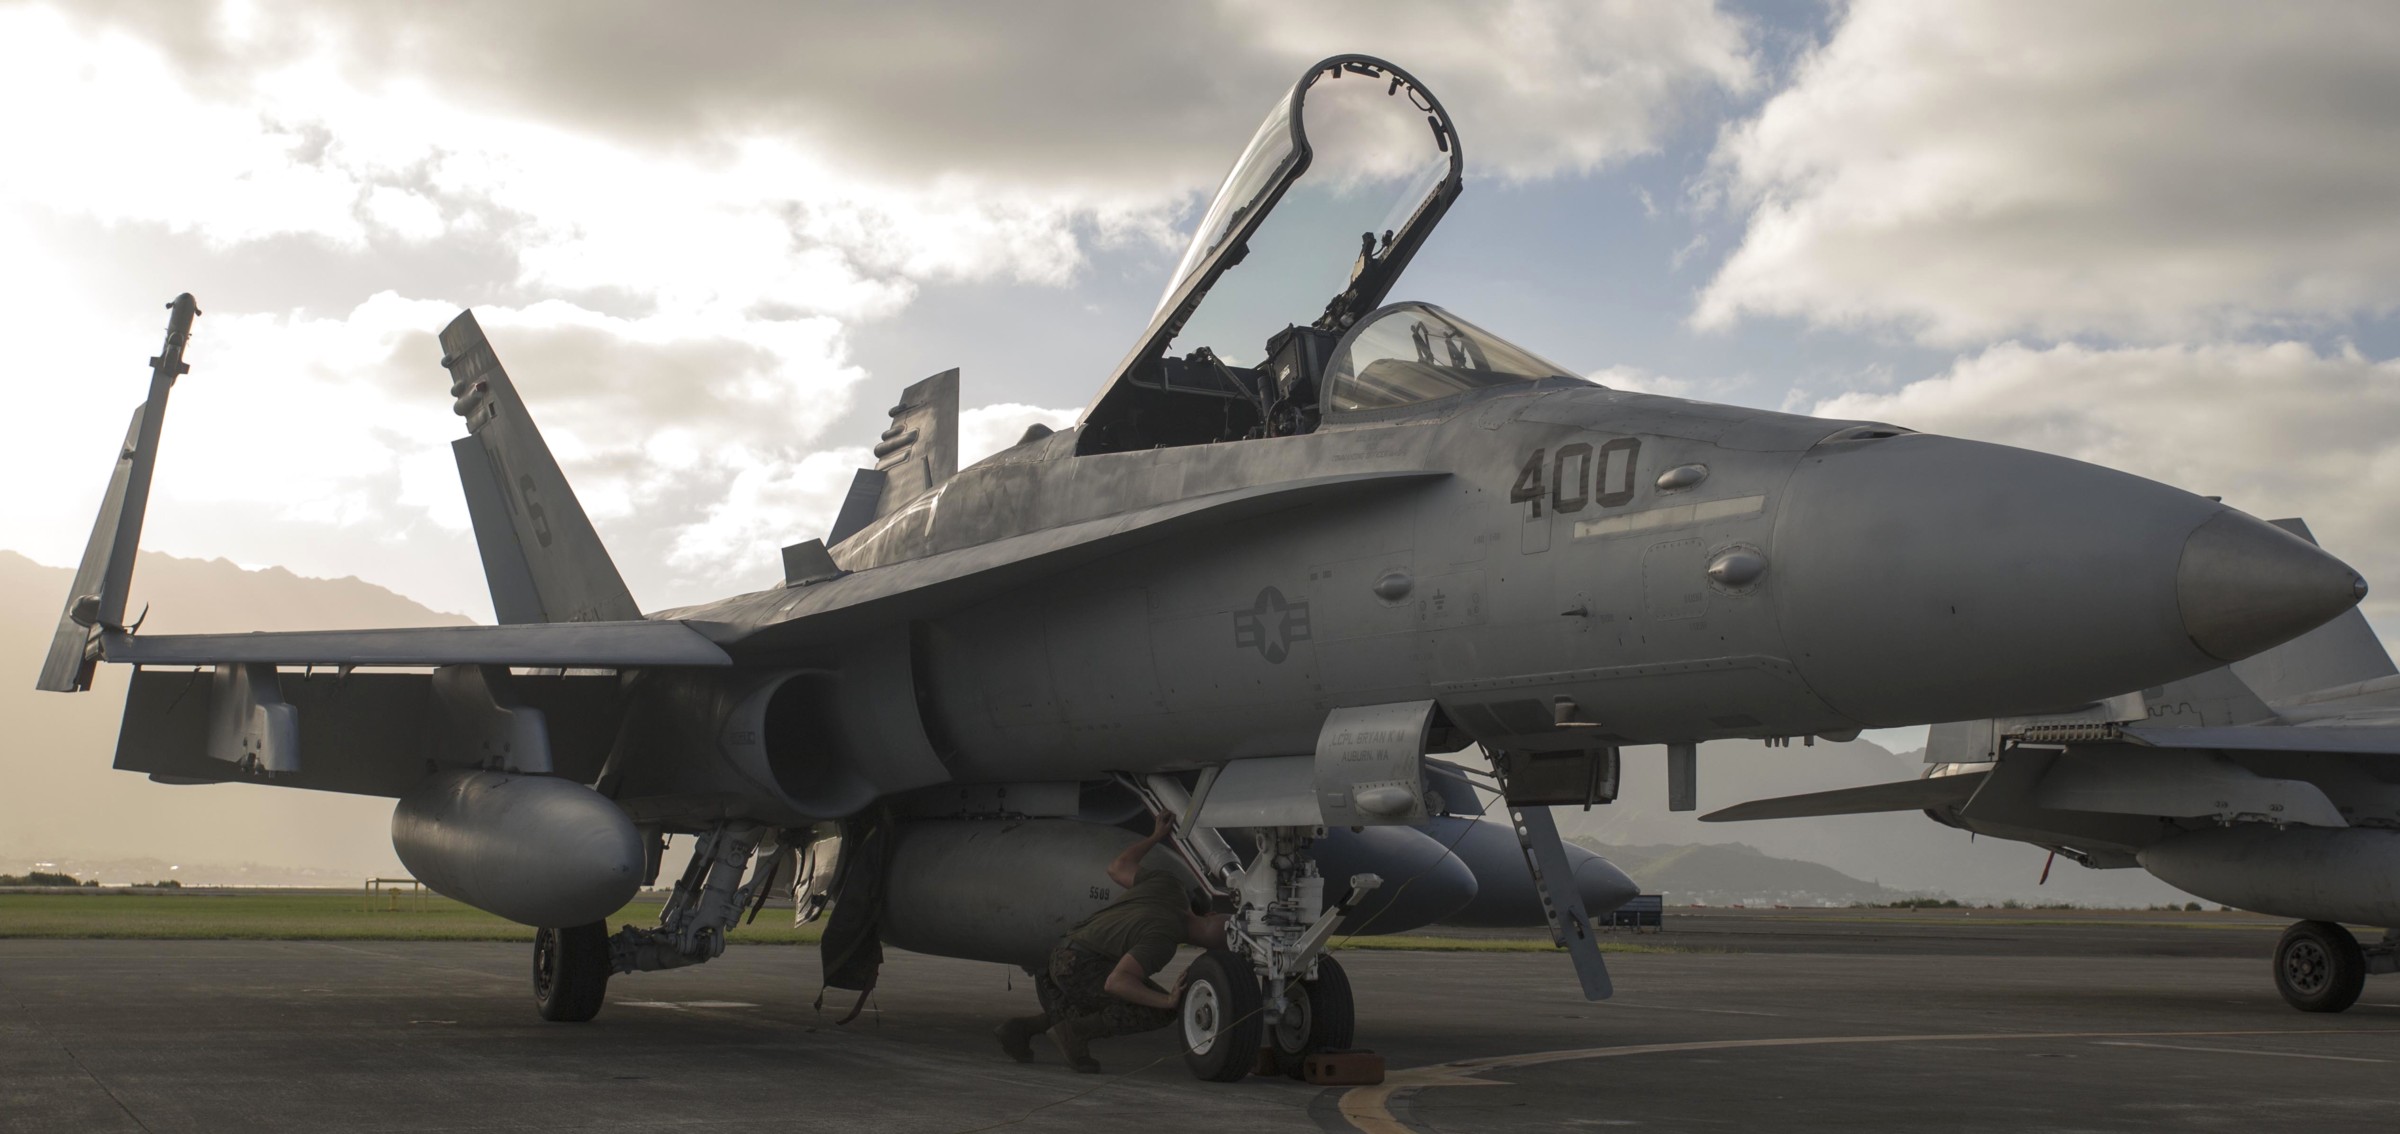 vmfa-323 death rattlers marine fighter attack squadron f/a-18c hornet 40 mcas kaneohe bay hawaii